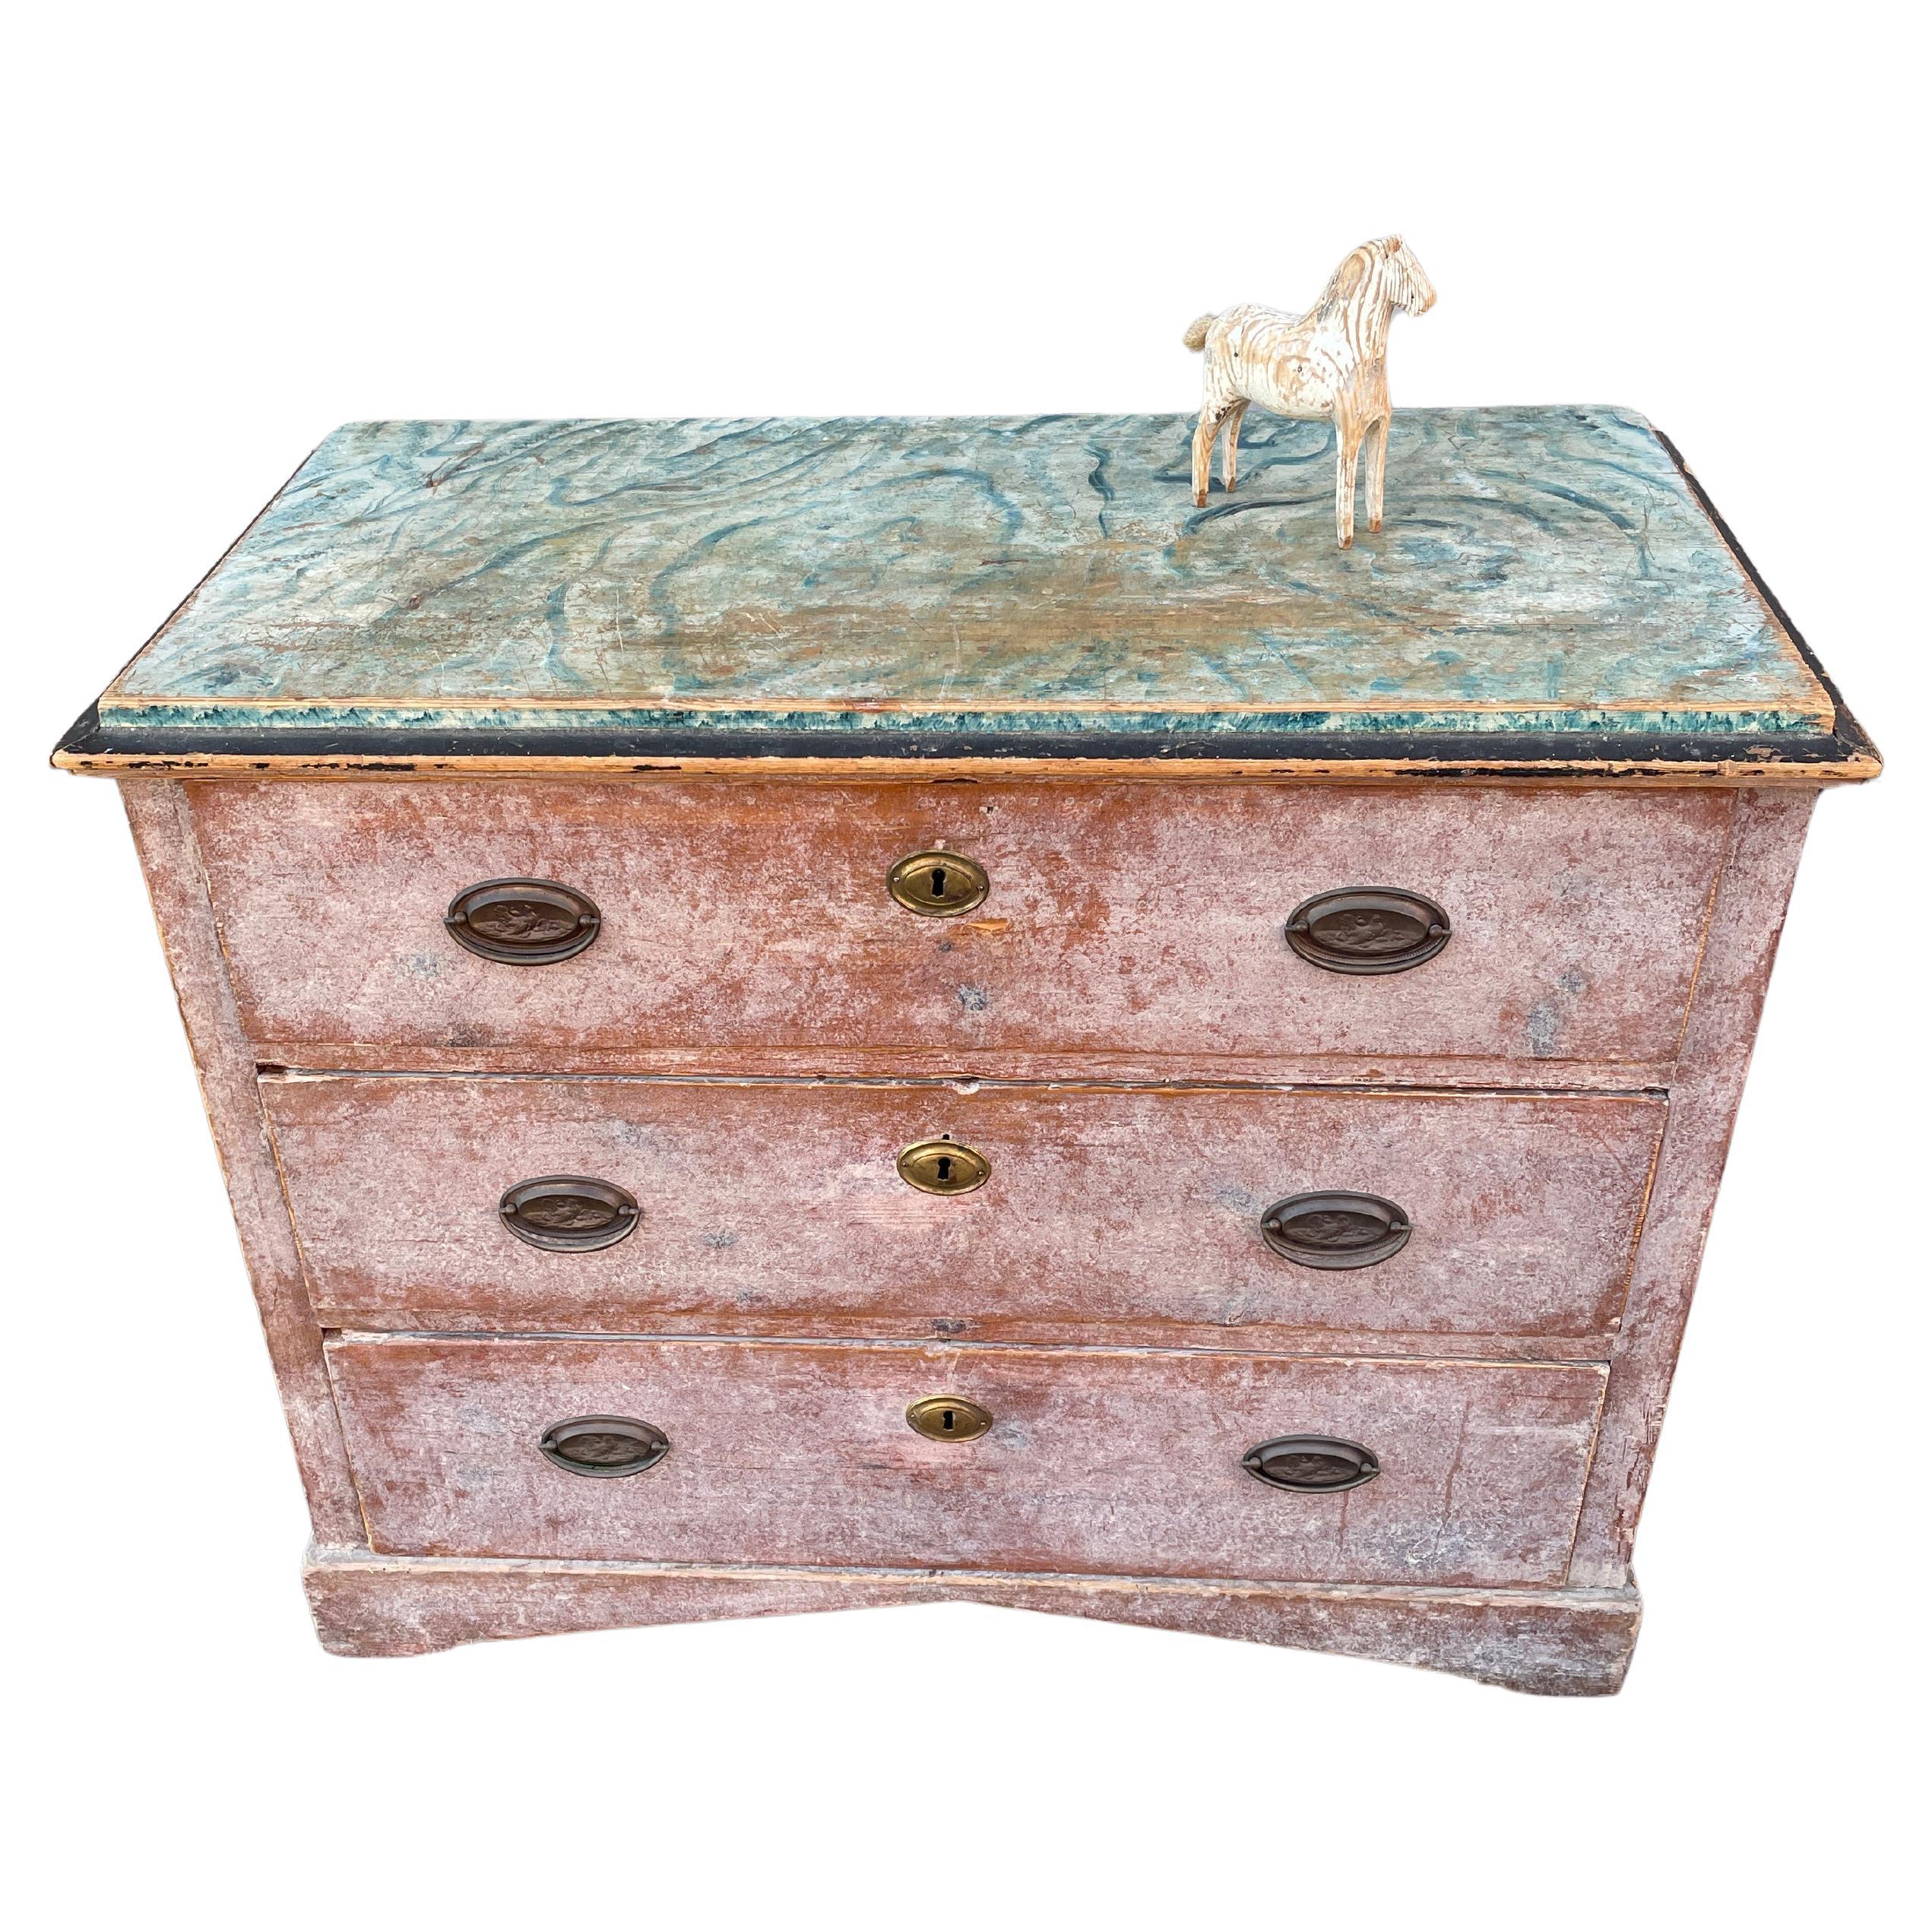 Early 19th Century Empire Chest with Painted Faux Marble Top In Good Condition For Sale In Haddonfield, NJ